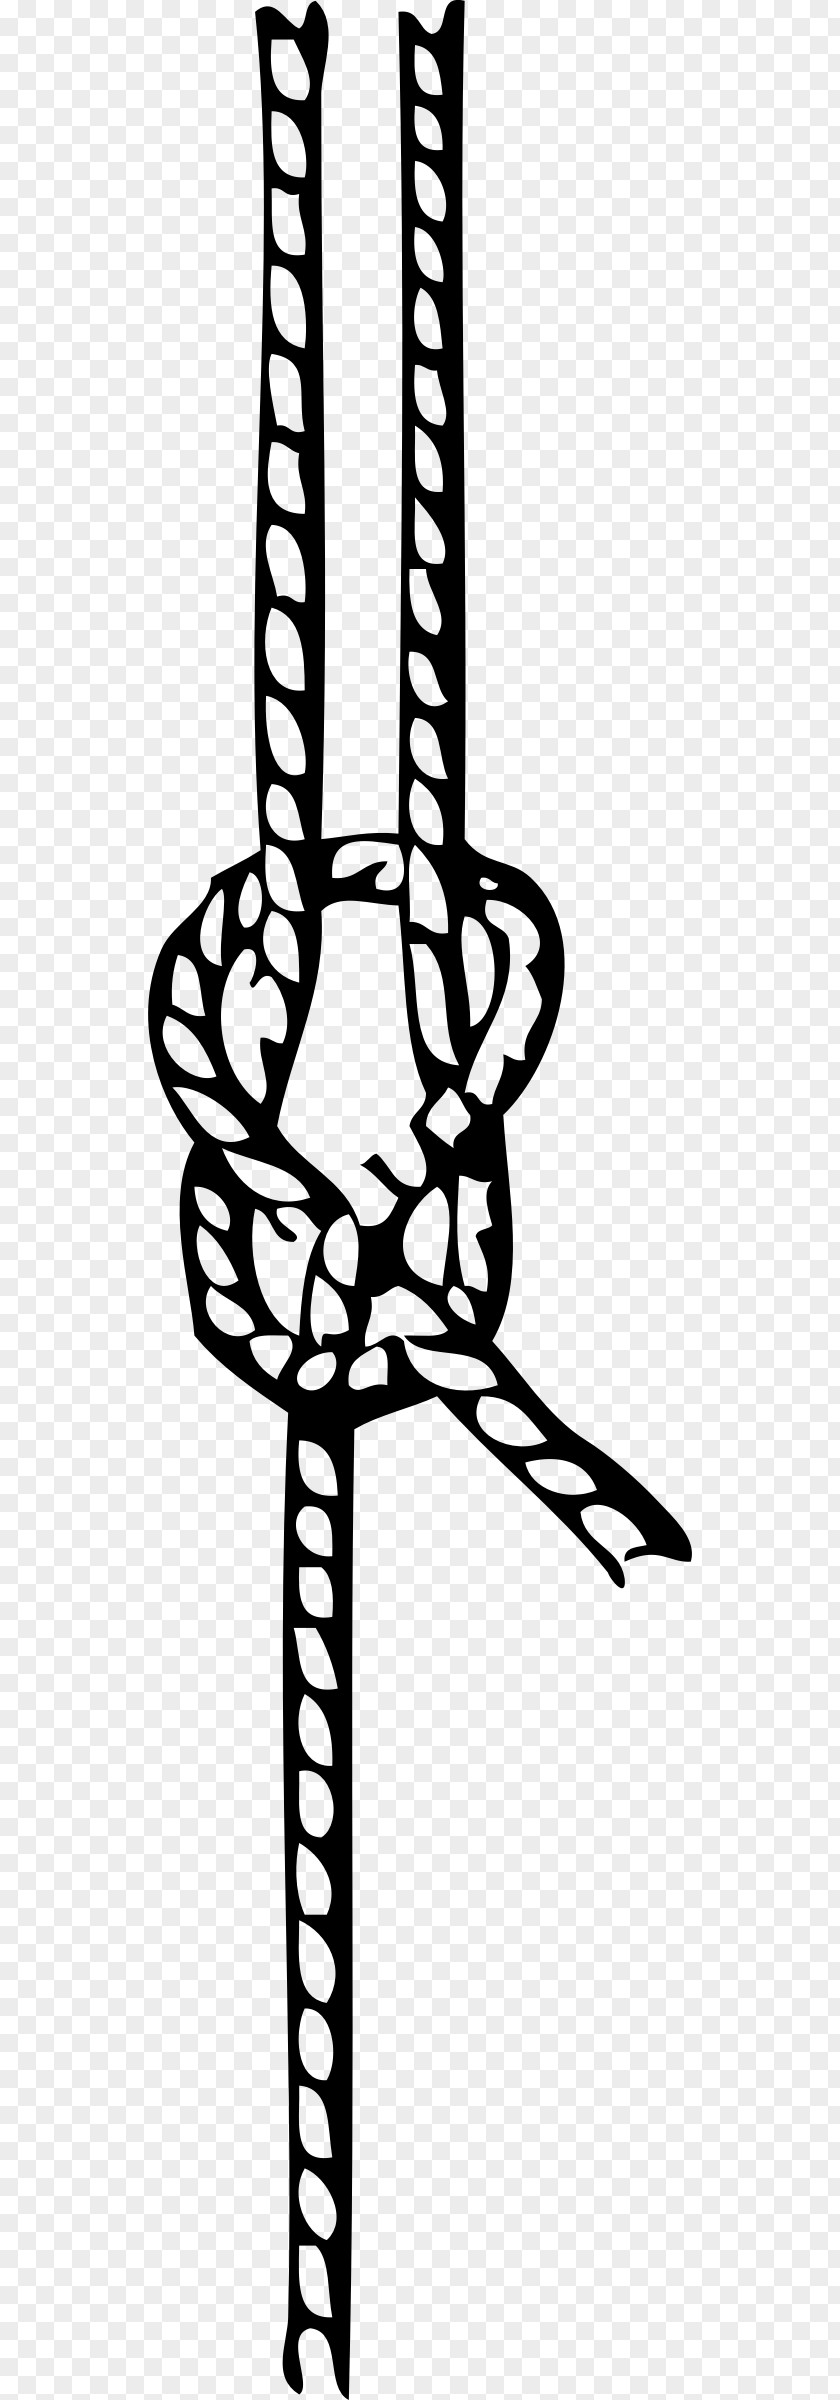 Splice Seizing Knot Rope Splicing Clip Art PNG